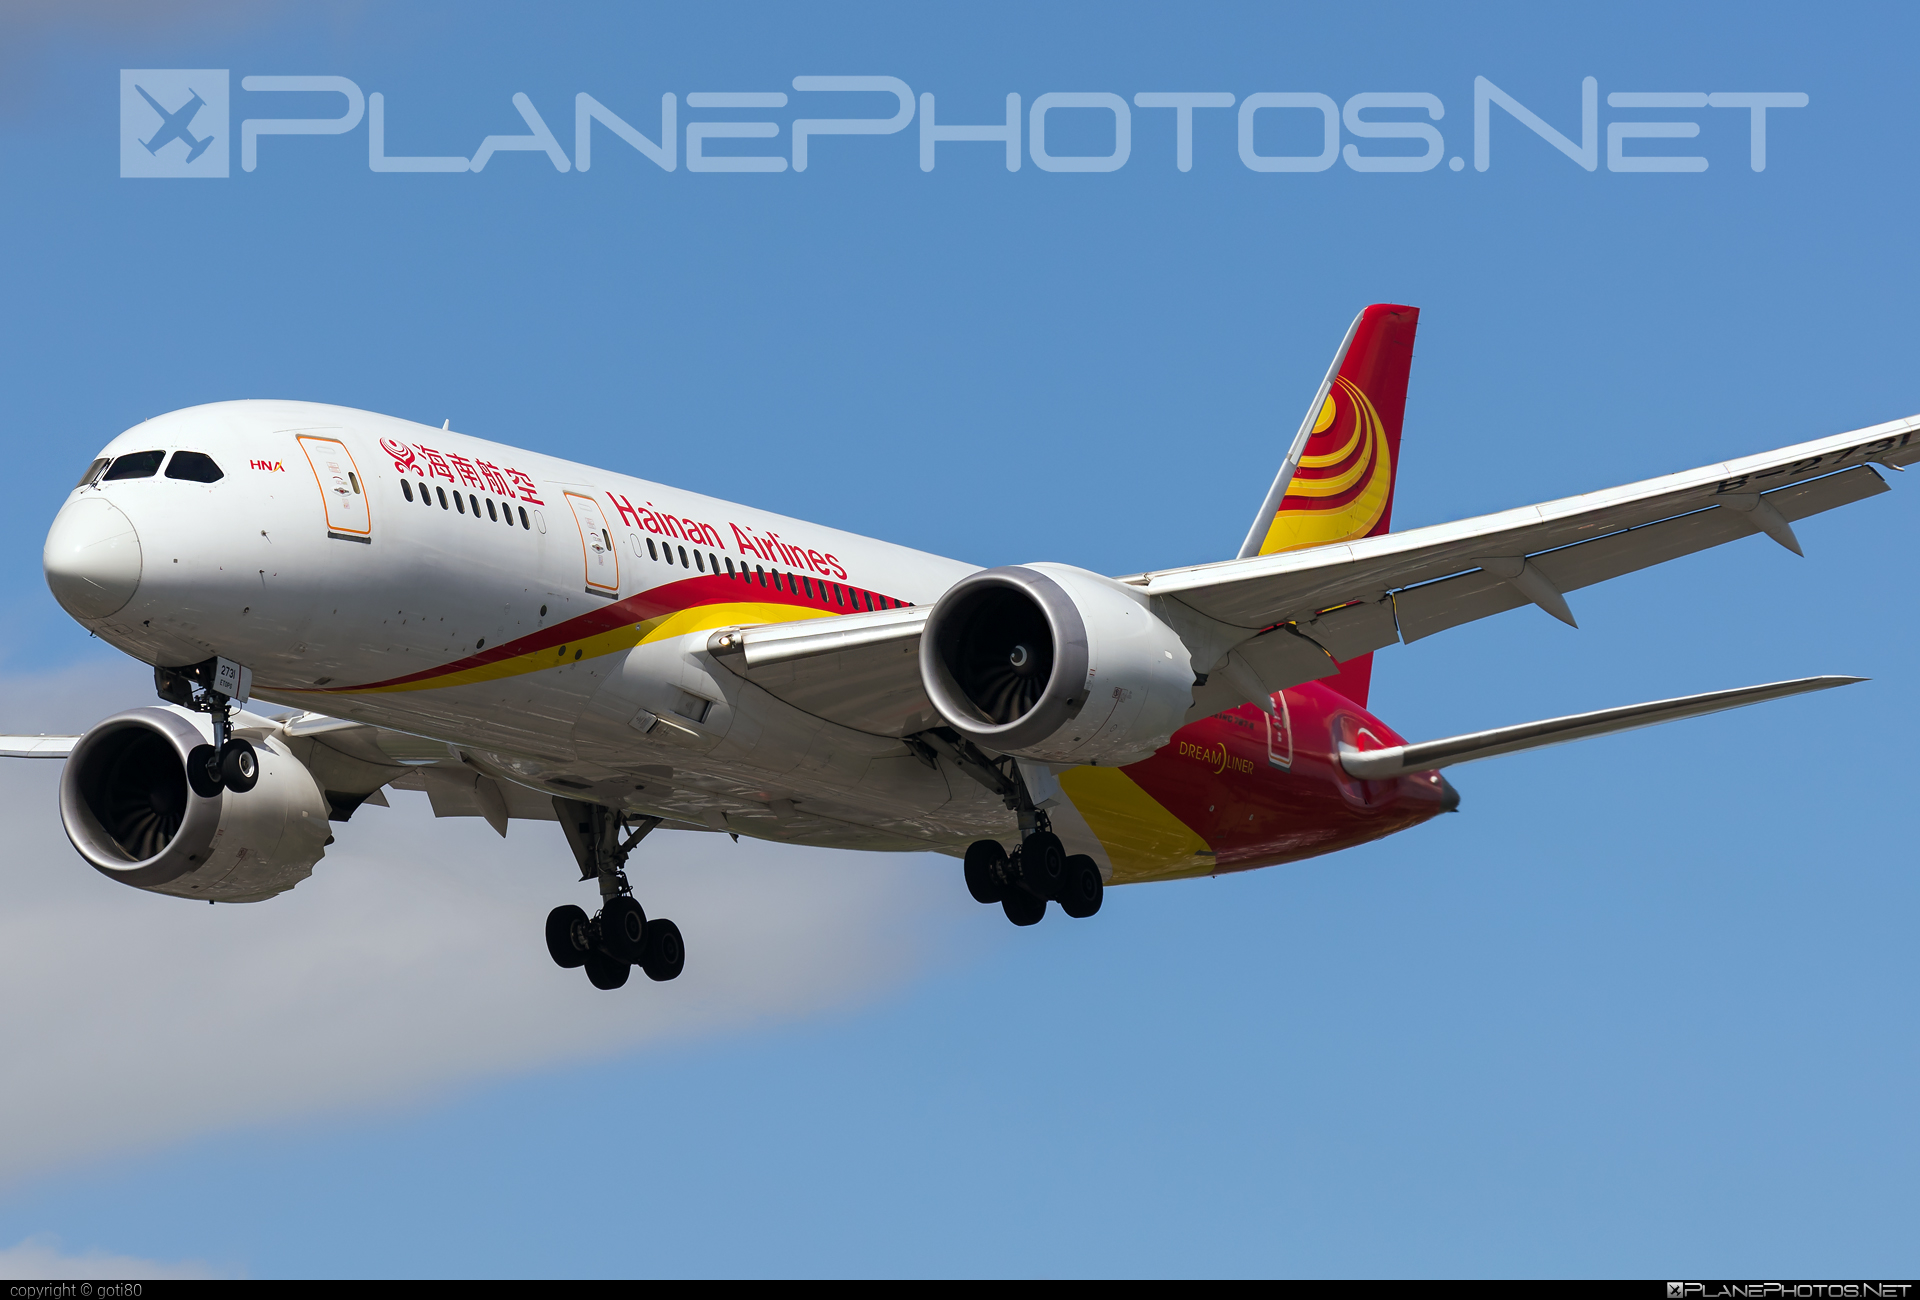 Boeing 787-8 Dreamliner - B-2731 operated by Hainan Airlines #b787 #boeing #boeing787 #dreamliner